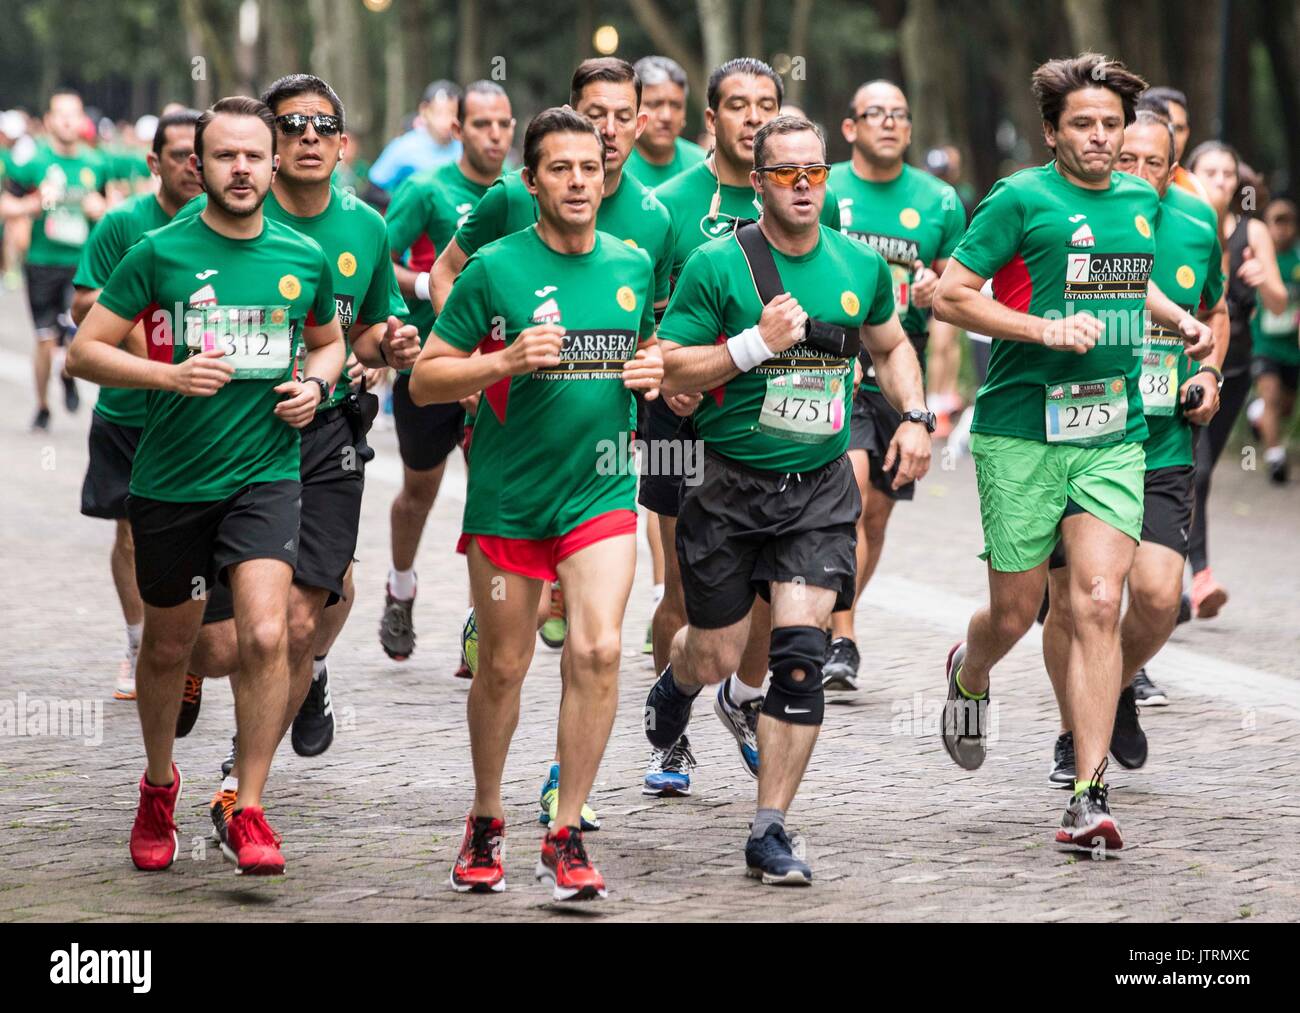 Mexican President Enrique Pena Nieto, center, takes part in the 7th Molino del Rey race in the forest of Chapultepec July 17, 2017 in Mexico City, Mexico.   (presidenciamx via Planetpix) Stock Photo